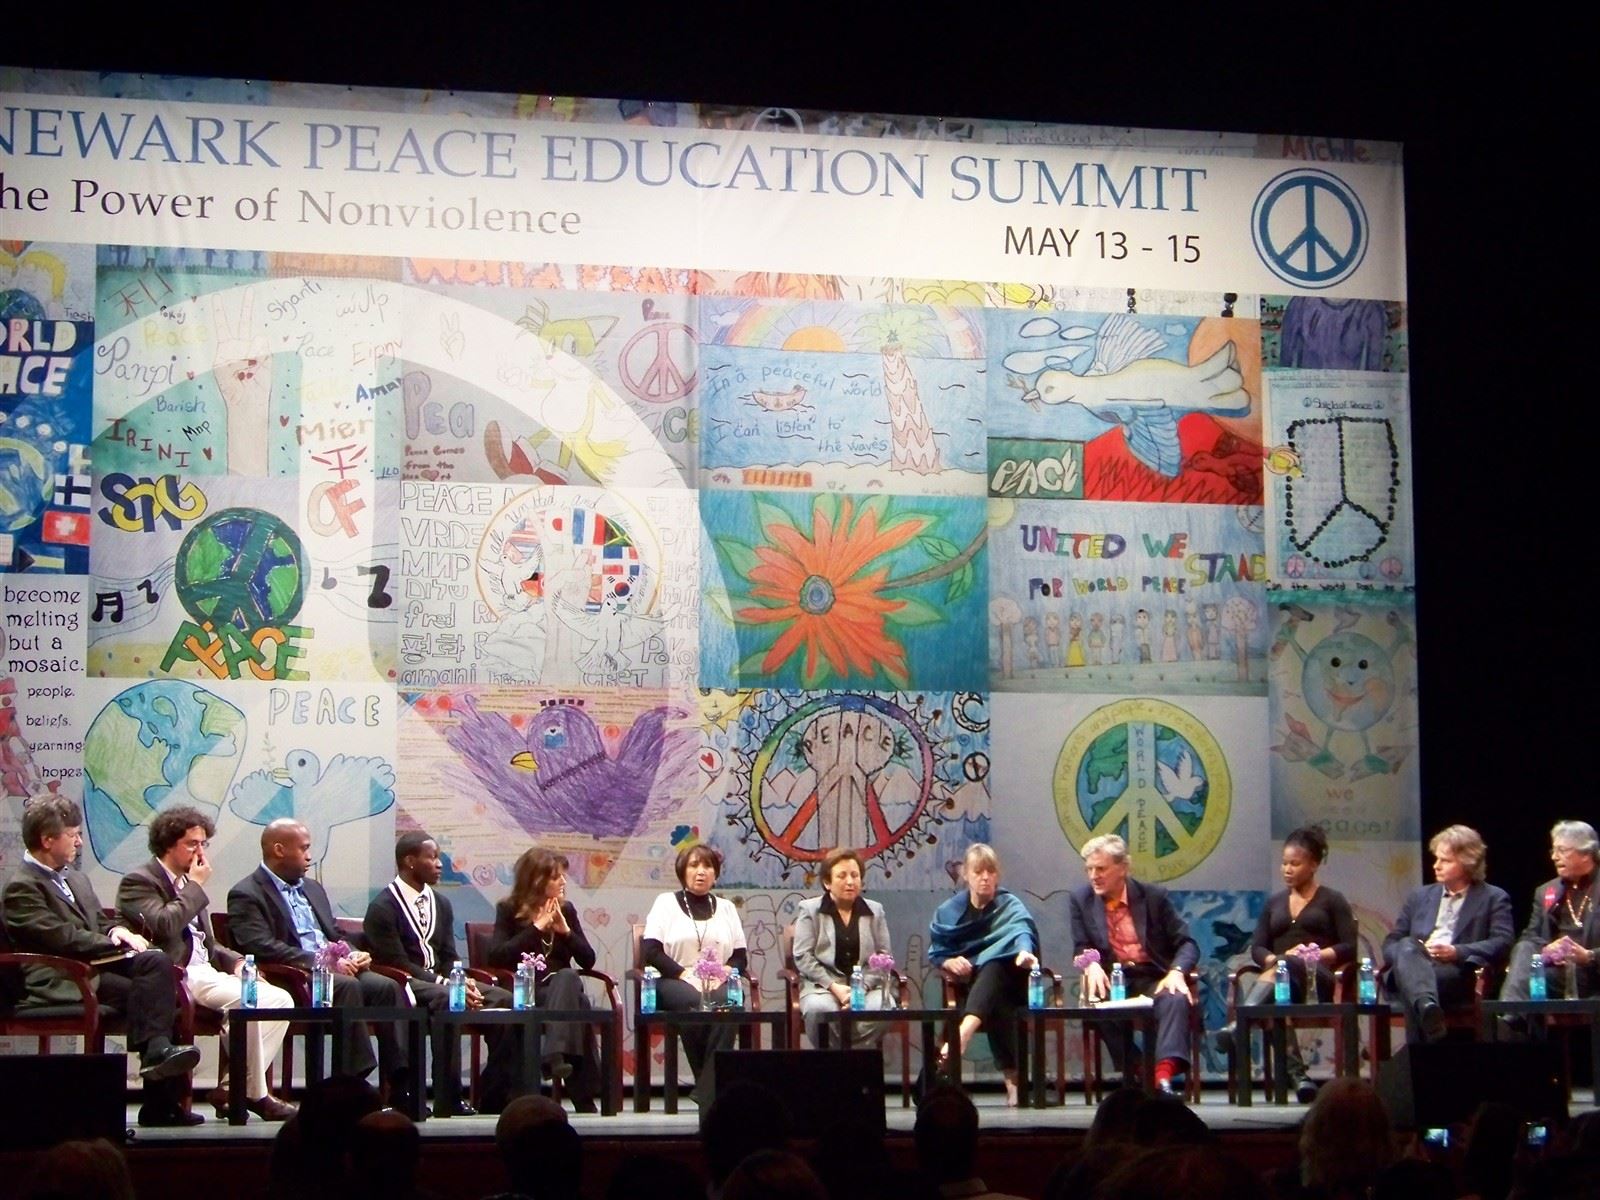 Peace Mural @NewarkPeace : Panelists onstage at the Newark Peace Education Conference, May 2011